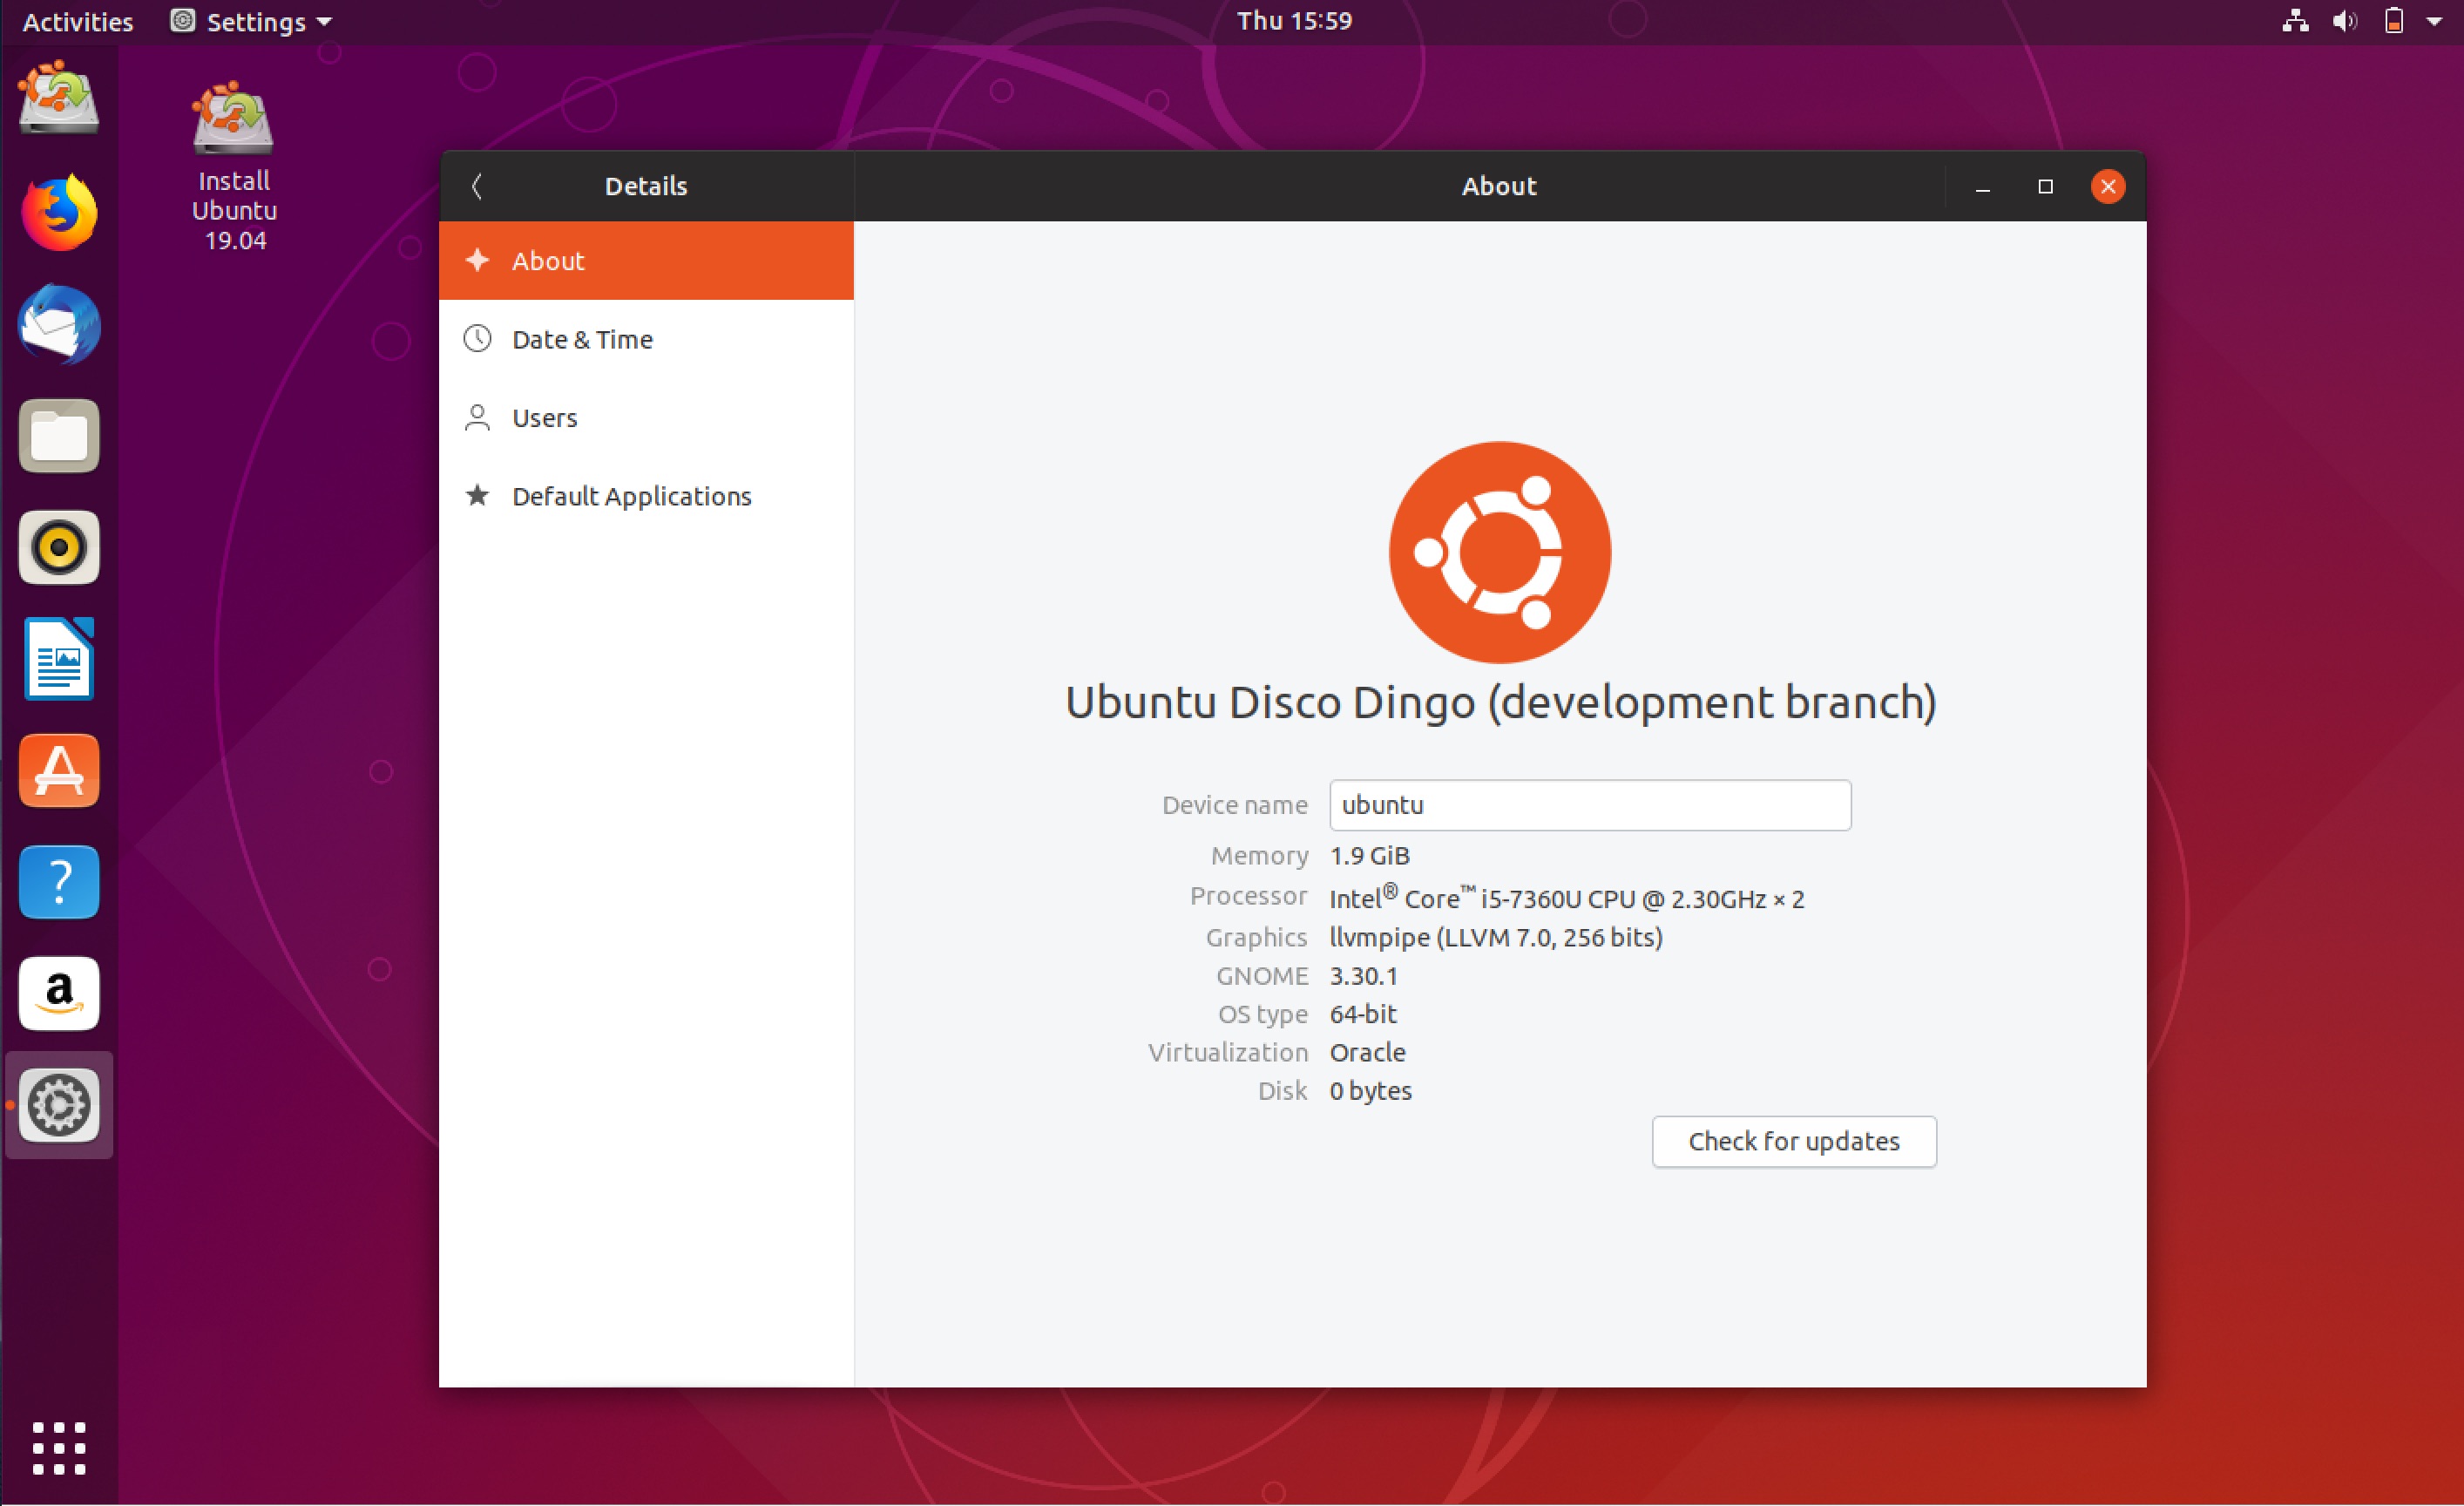 Ubuntu 19.04 Disco Dingo Beta now available with Linux kernel 5.0 and GNOME 3.32